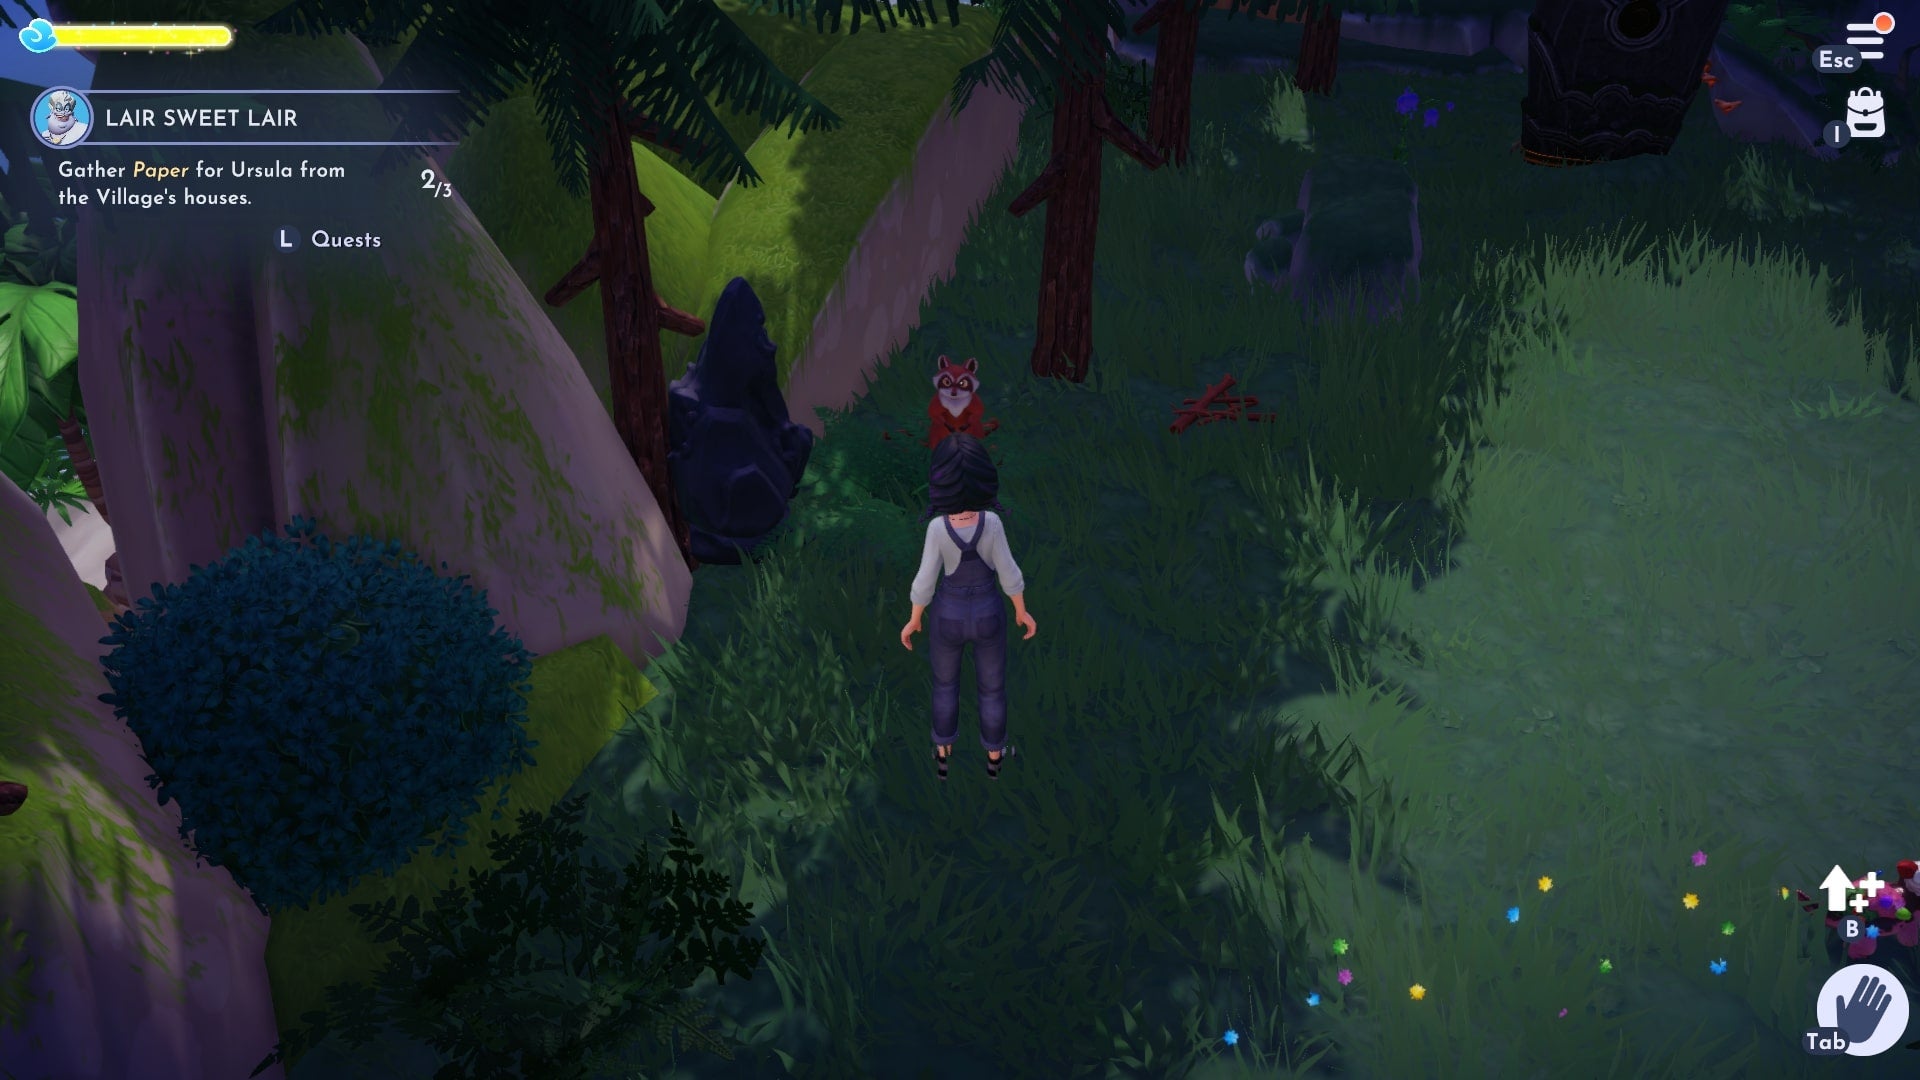 Player looking at a raccoon in Disney Dreamlight Valley